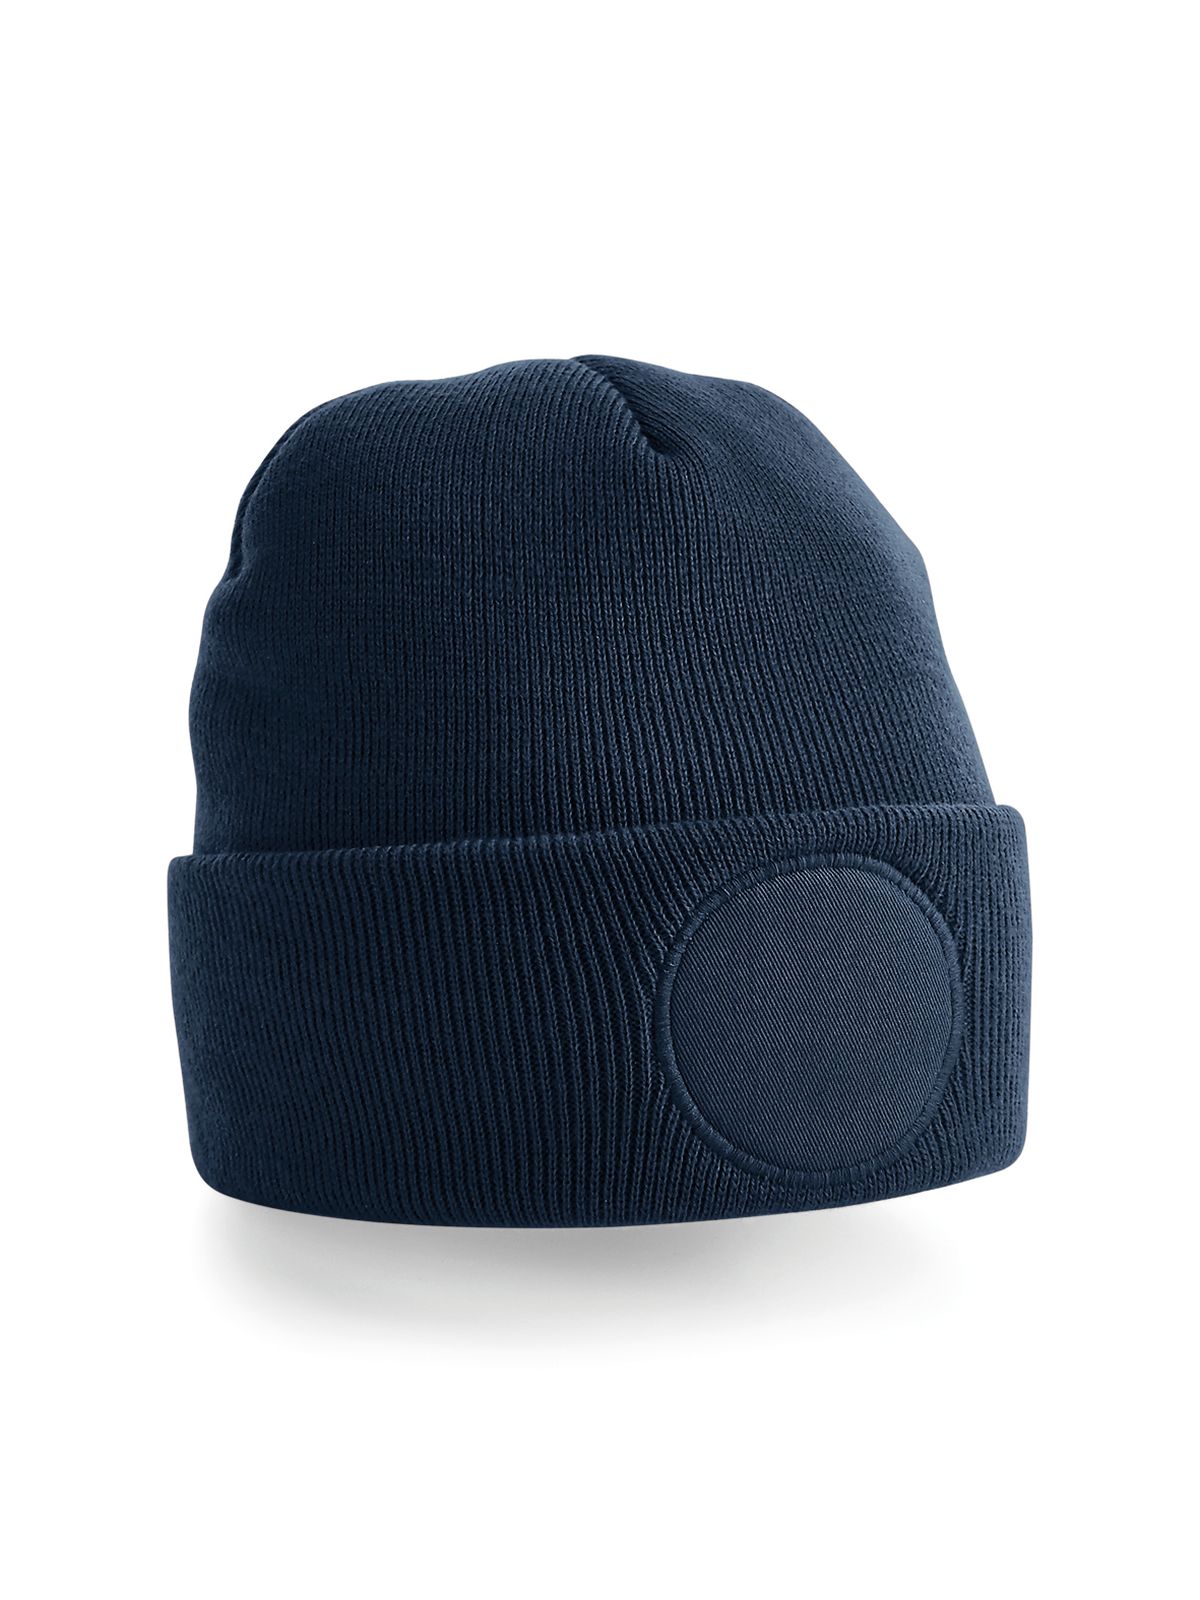 circular-patch-beanie-french-navy.webp